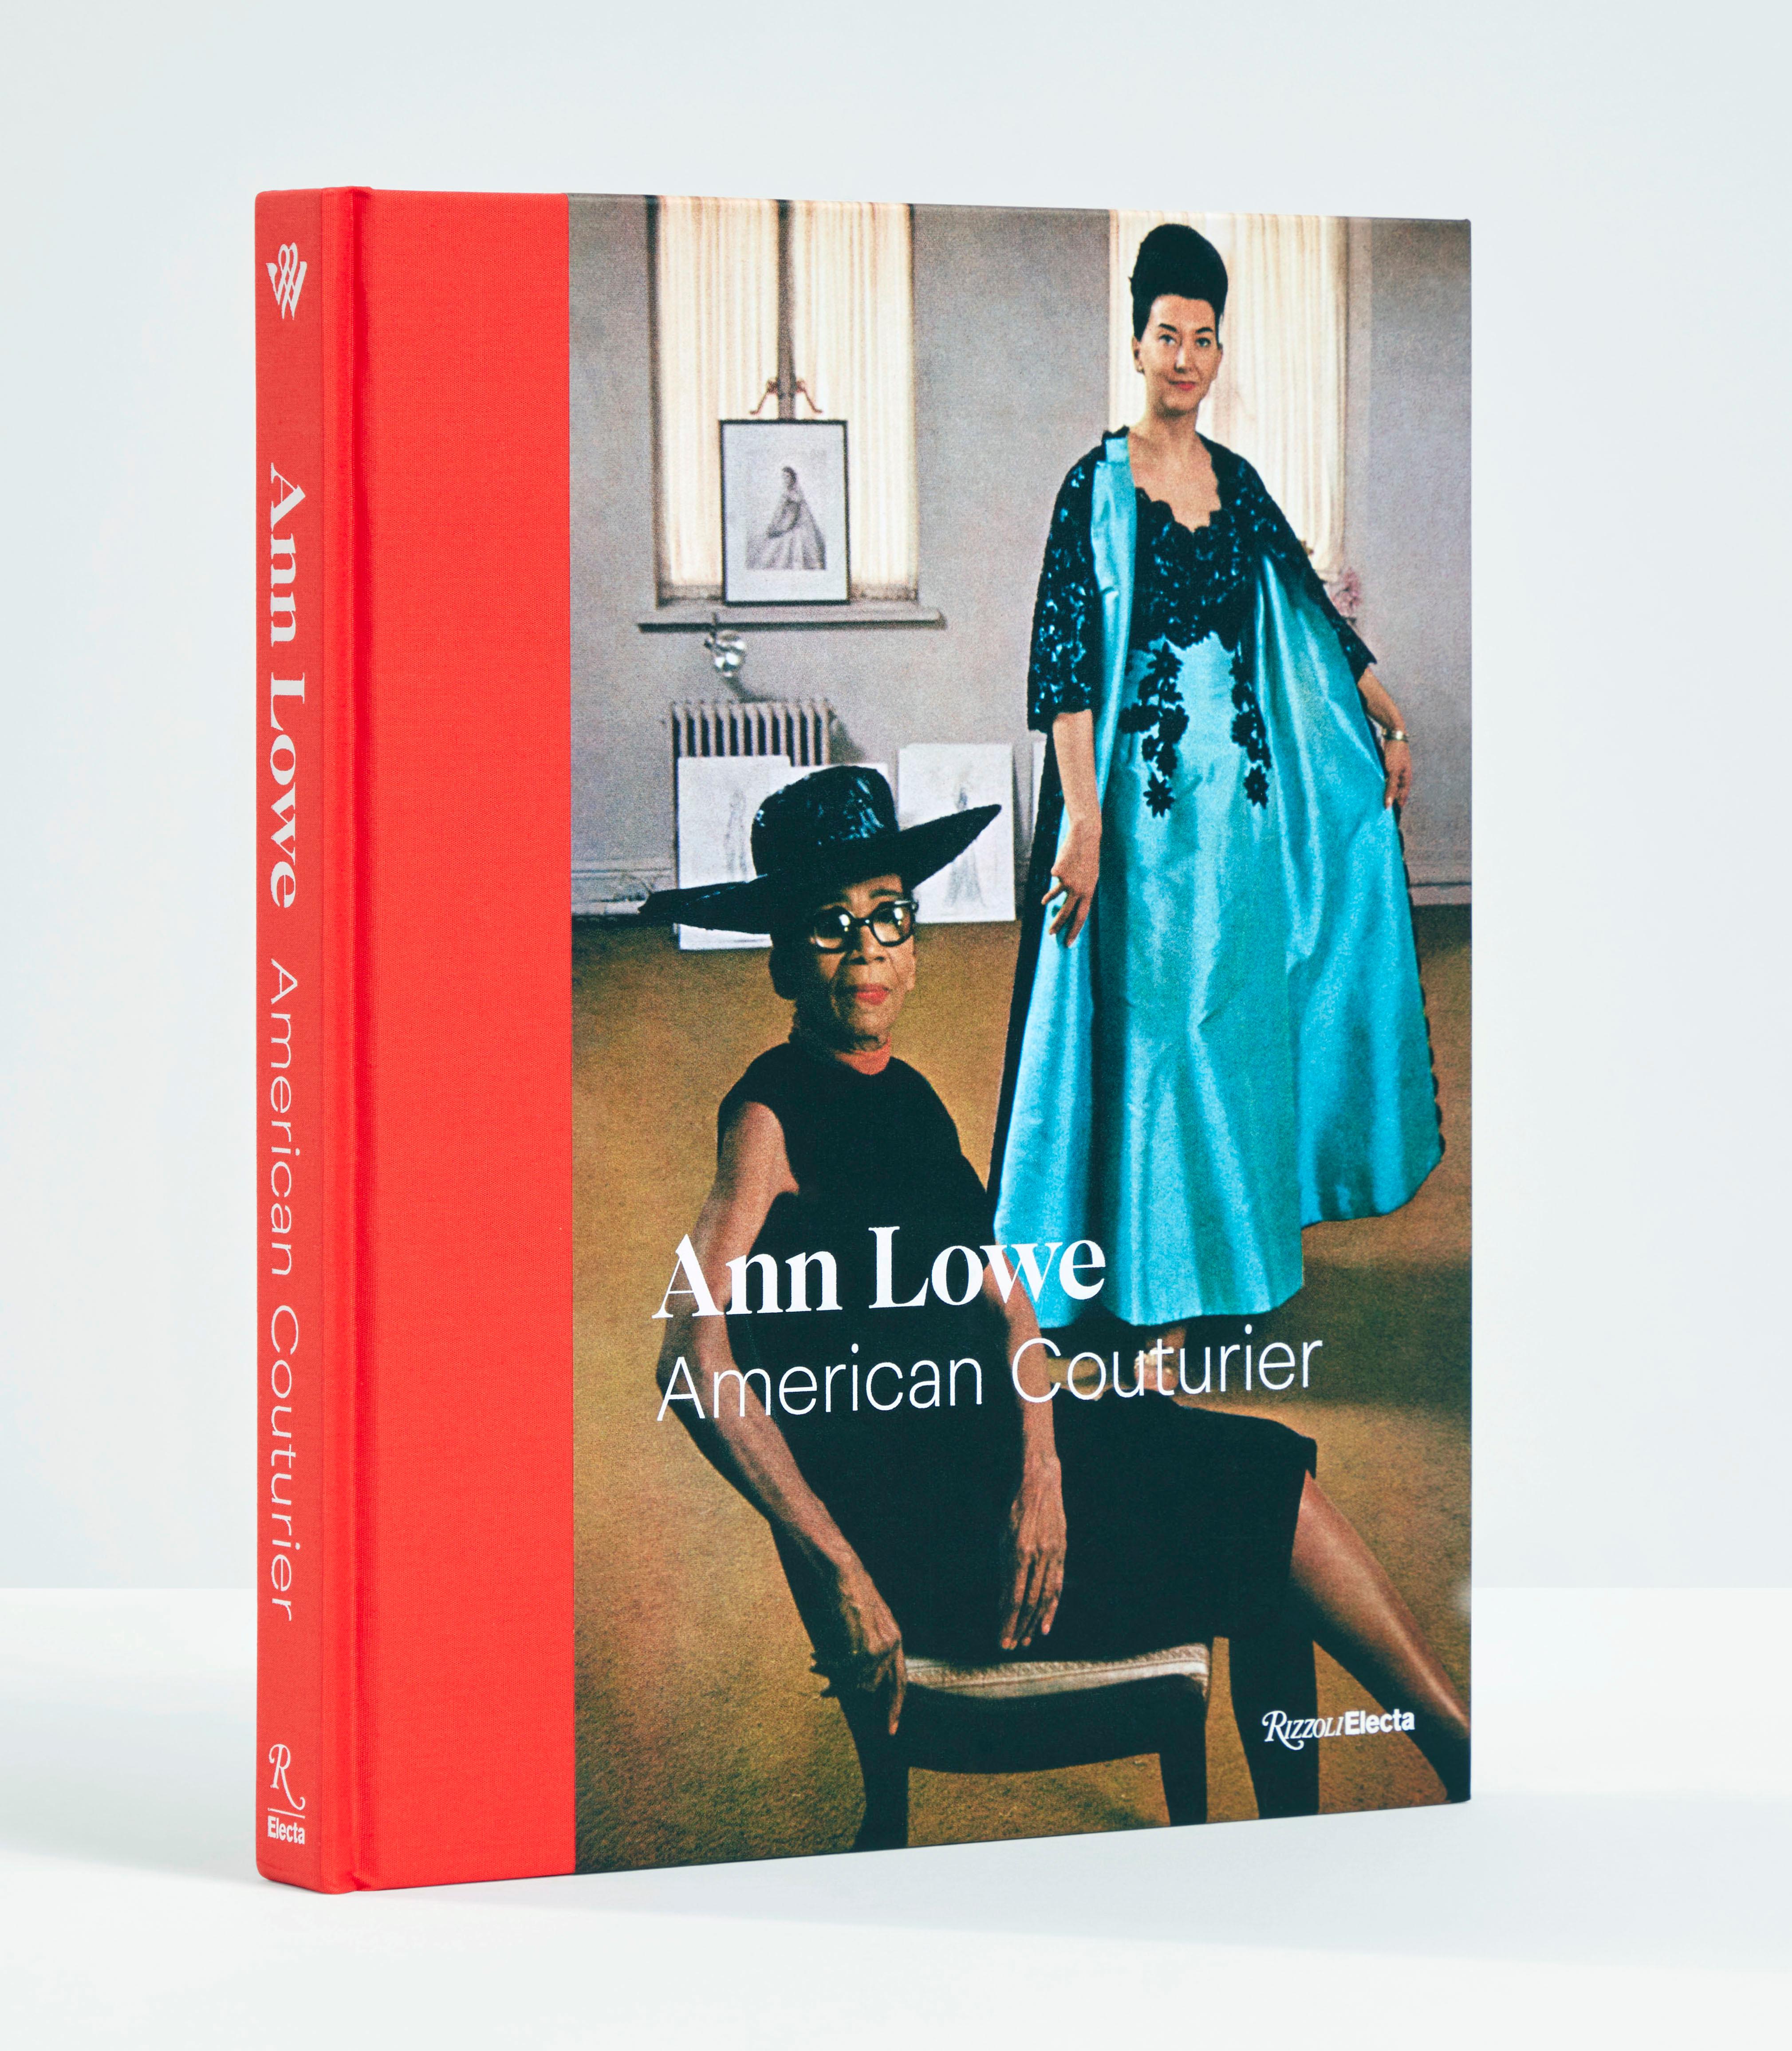 The definitive illustrated volume on the work and life of Ann Lowe, a consummate couturier who designed lavish evening and bridal gowns for members of America’s social registry, a Black woman working hard behind the scenes whose important legacy has